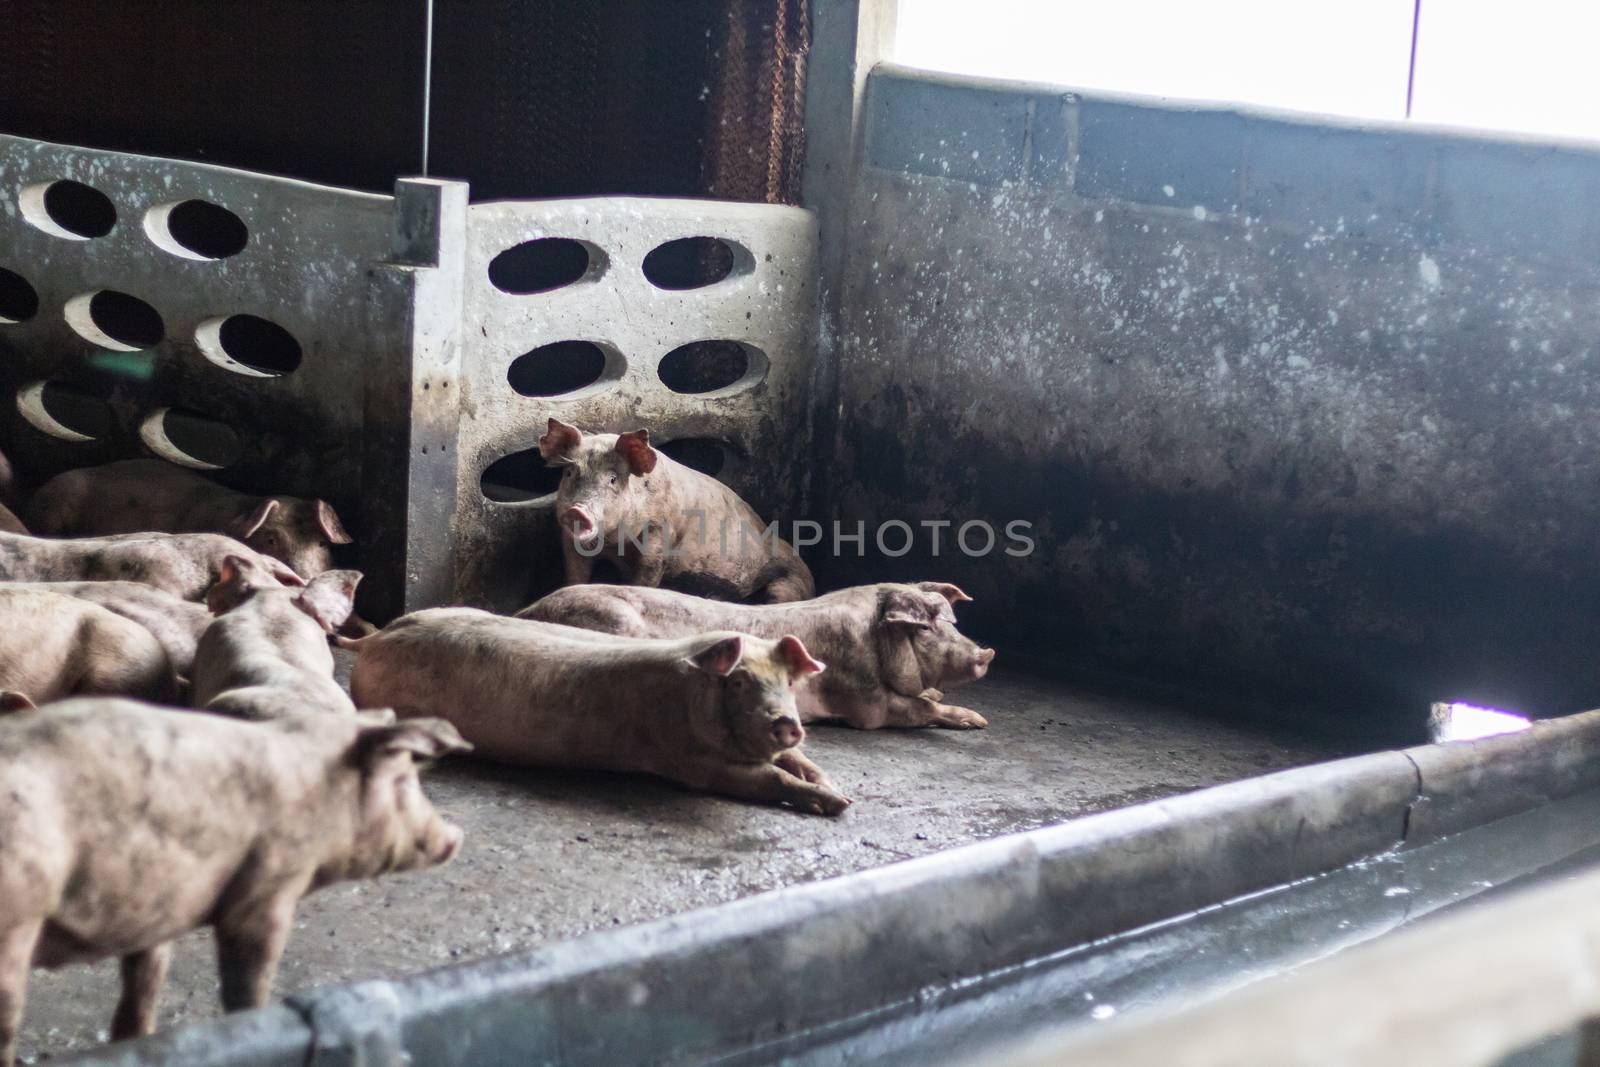 The fat pig is sleeping after eating a meal at the pig farm. Pig farm, closed system to prevent odors and germs. by minamija